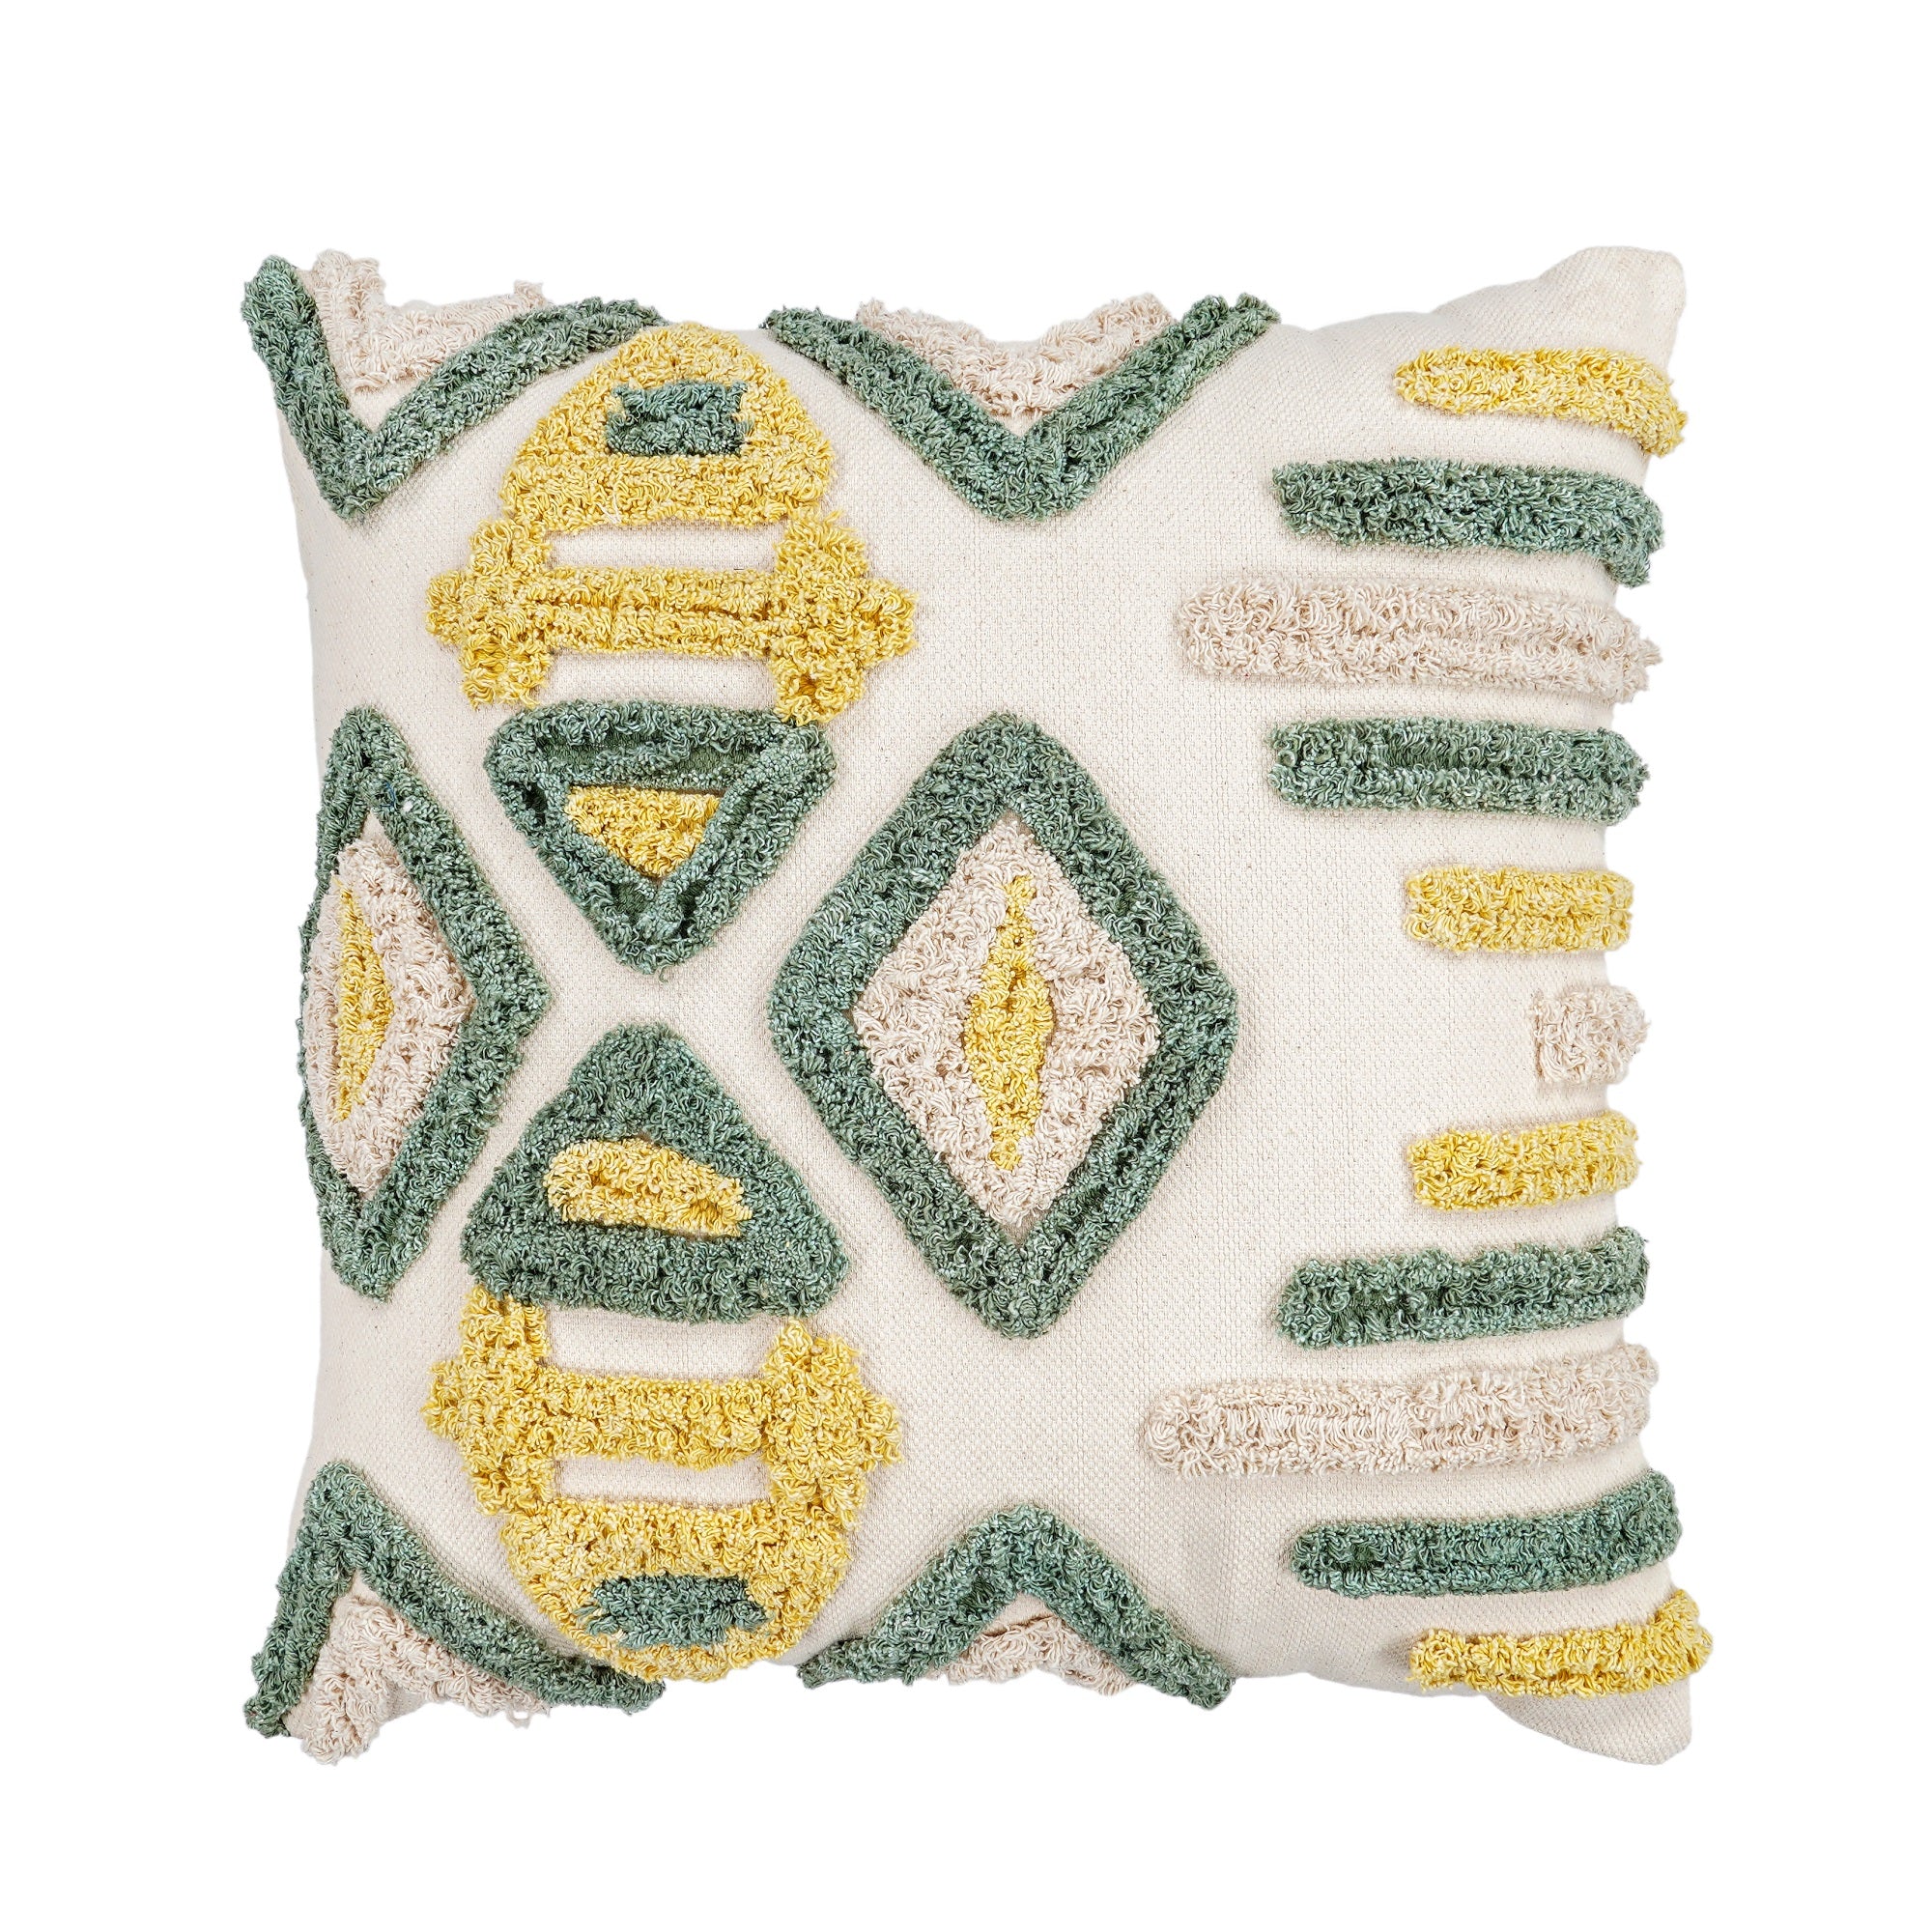 'Rustic Vibes' Hand-Woven Cotton Wool Cushion Cover